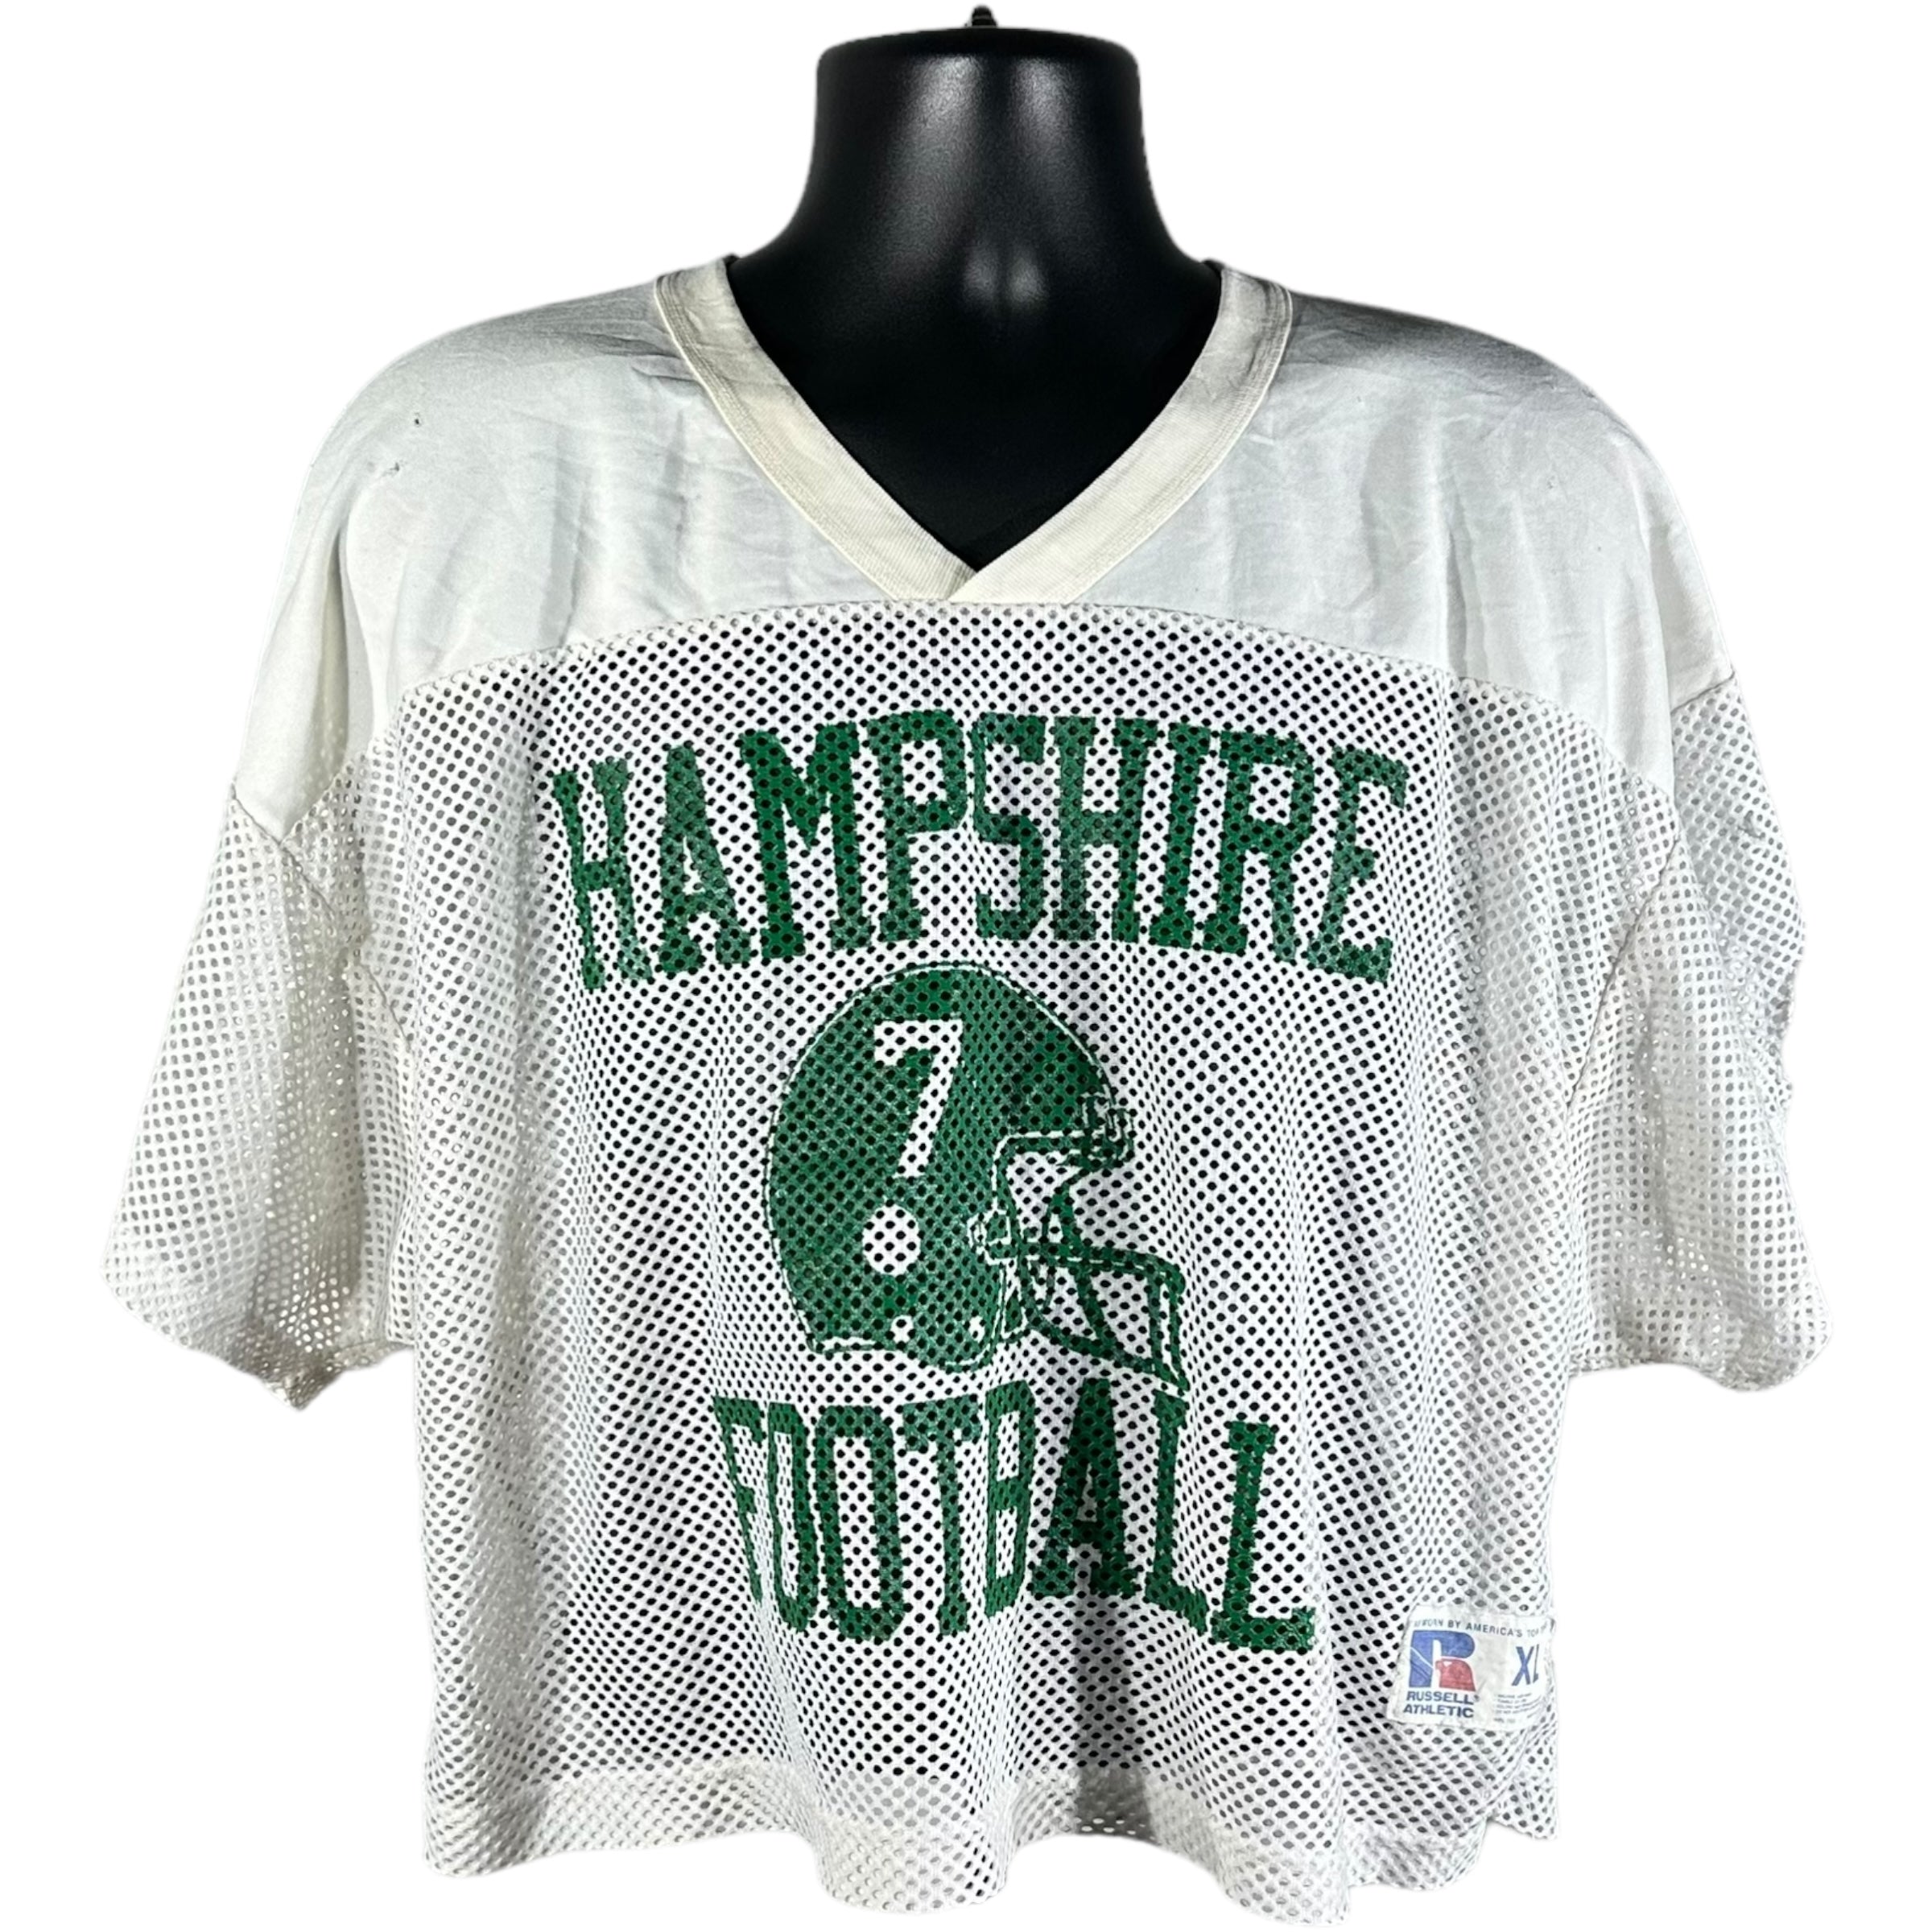 Vintage Hampshire Football #7 Russell Jersey